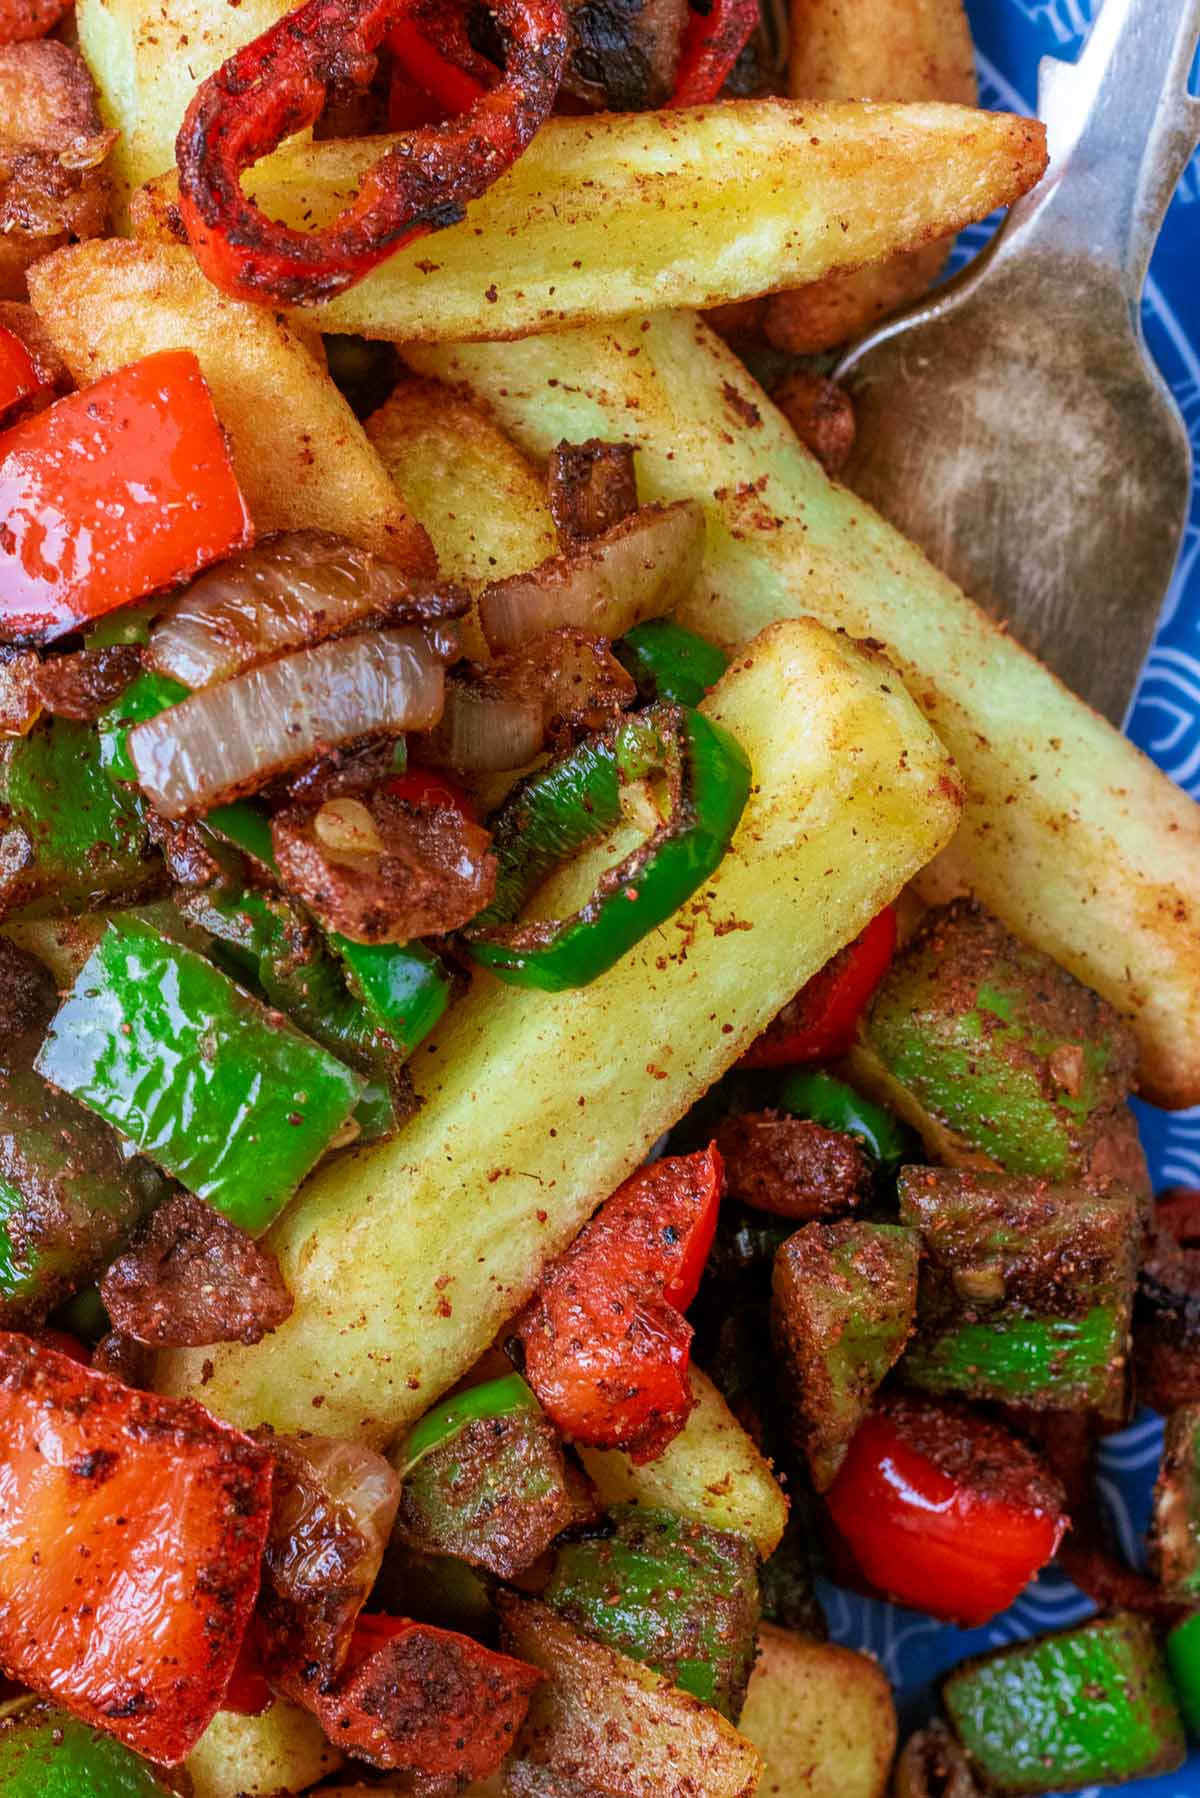 Cooked chips mixed with peppers, onions and chillies.